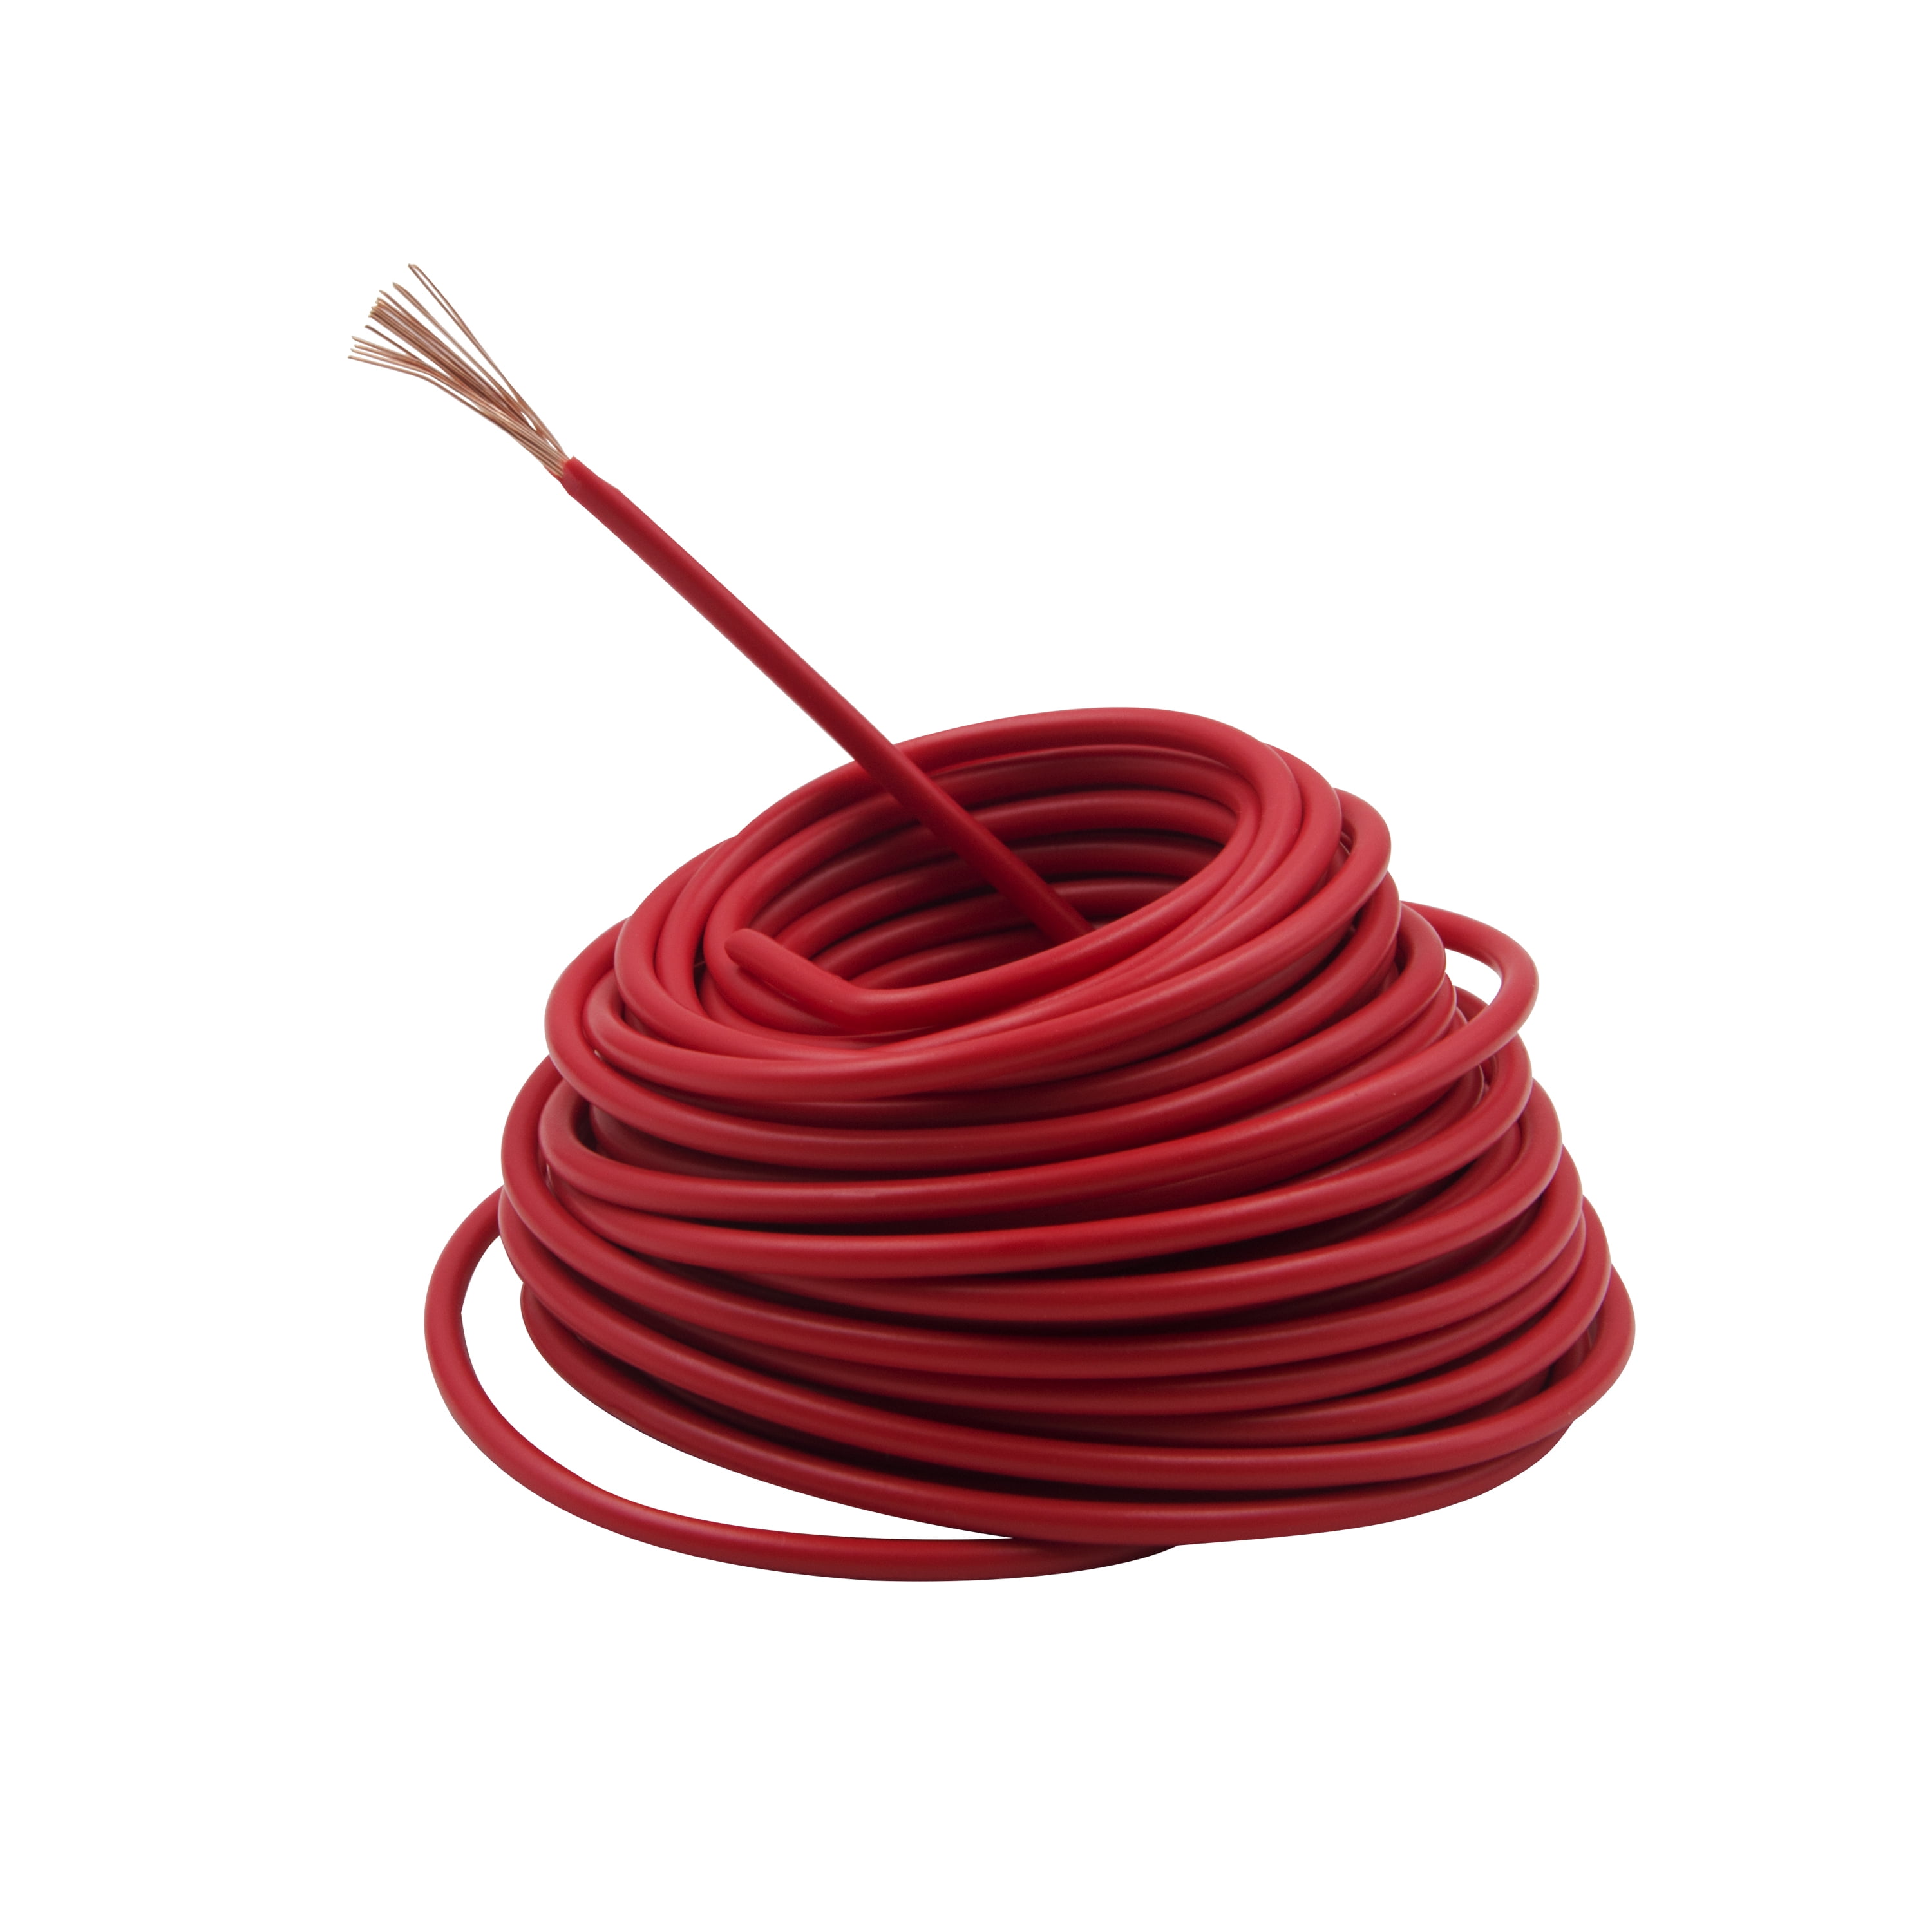 16 Gauge Wire, Red, Gpt Primary Wire, 16/30, 35 foot